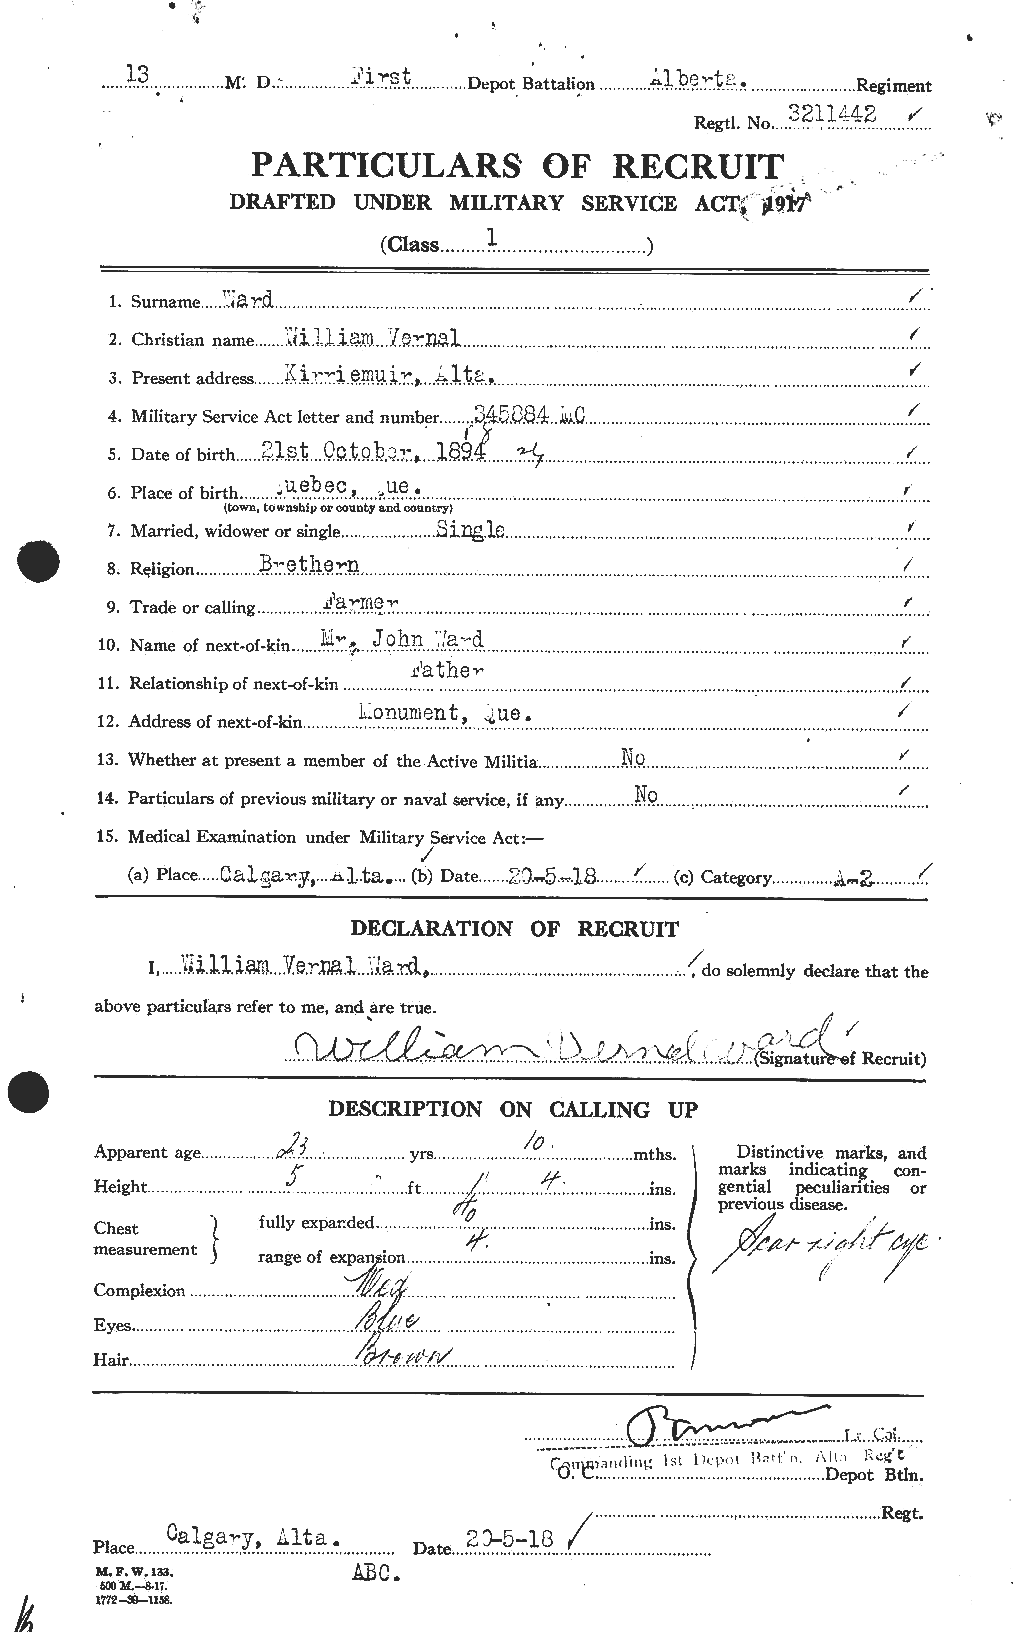 Personnel Records of the First World War - CEF 659843a